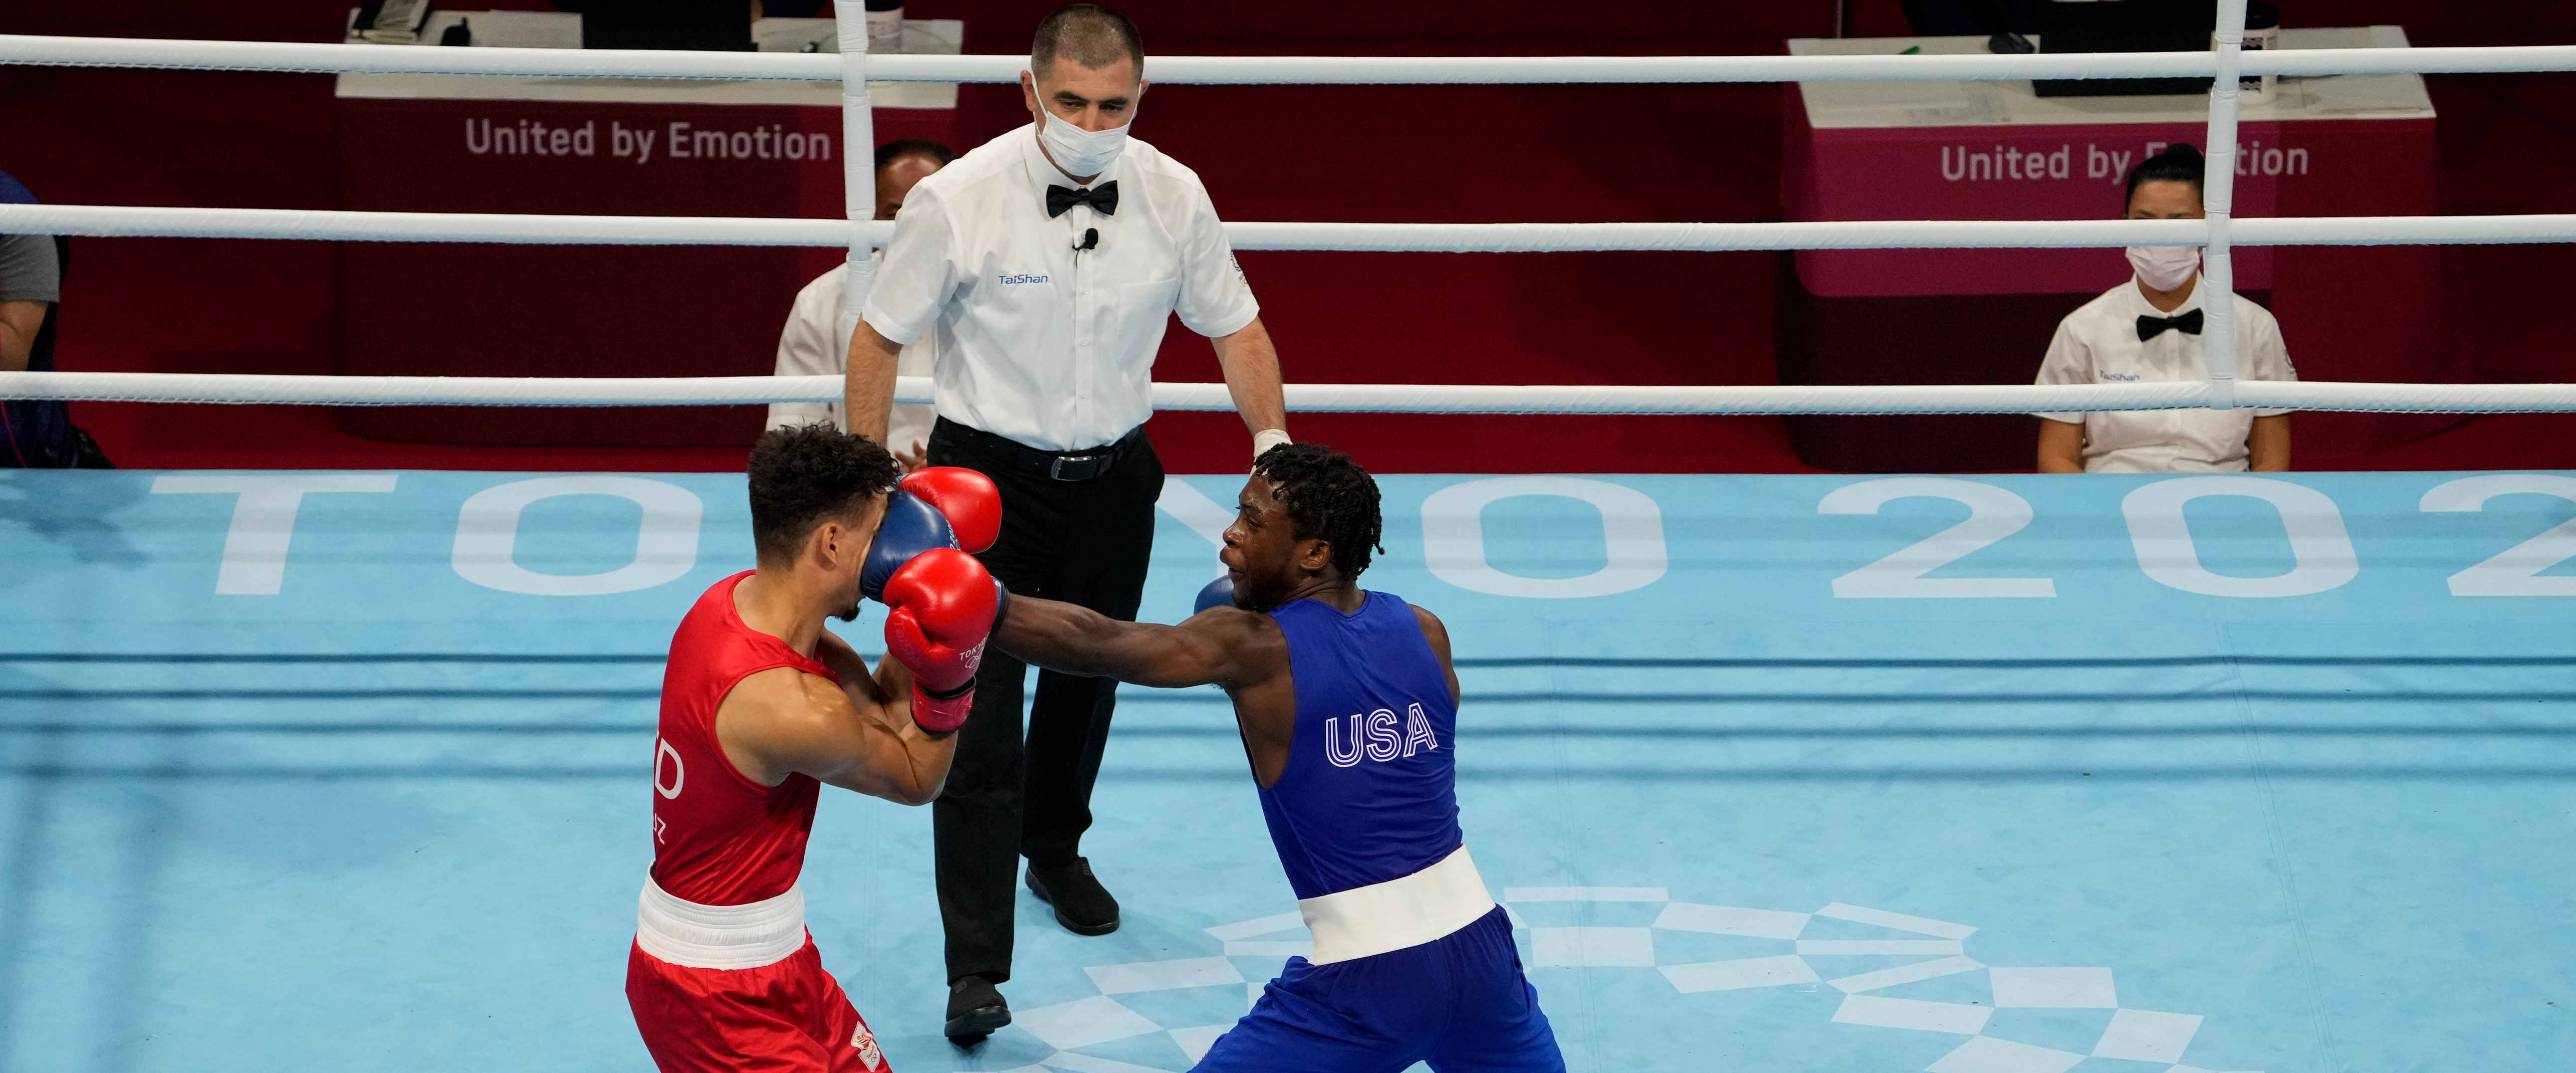 MUST-SEE: Olympic boxer tries to bite his opponent's ear!